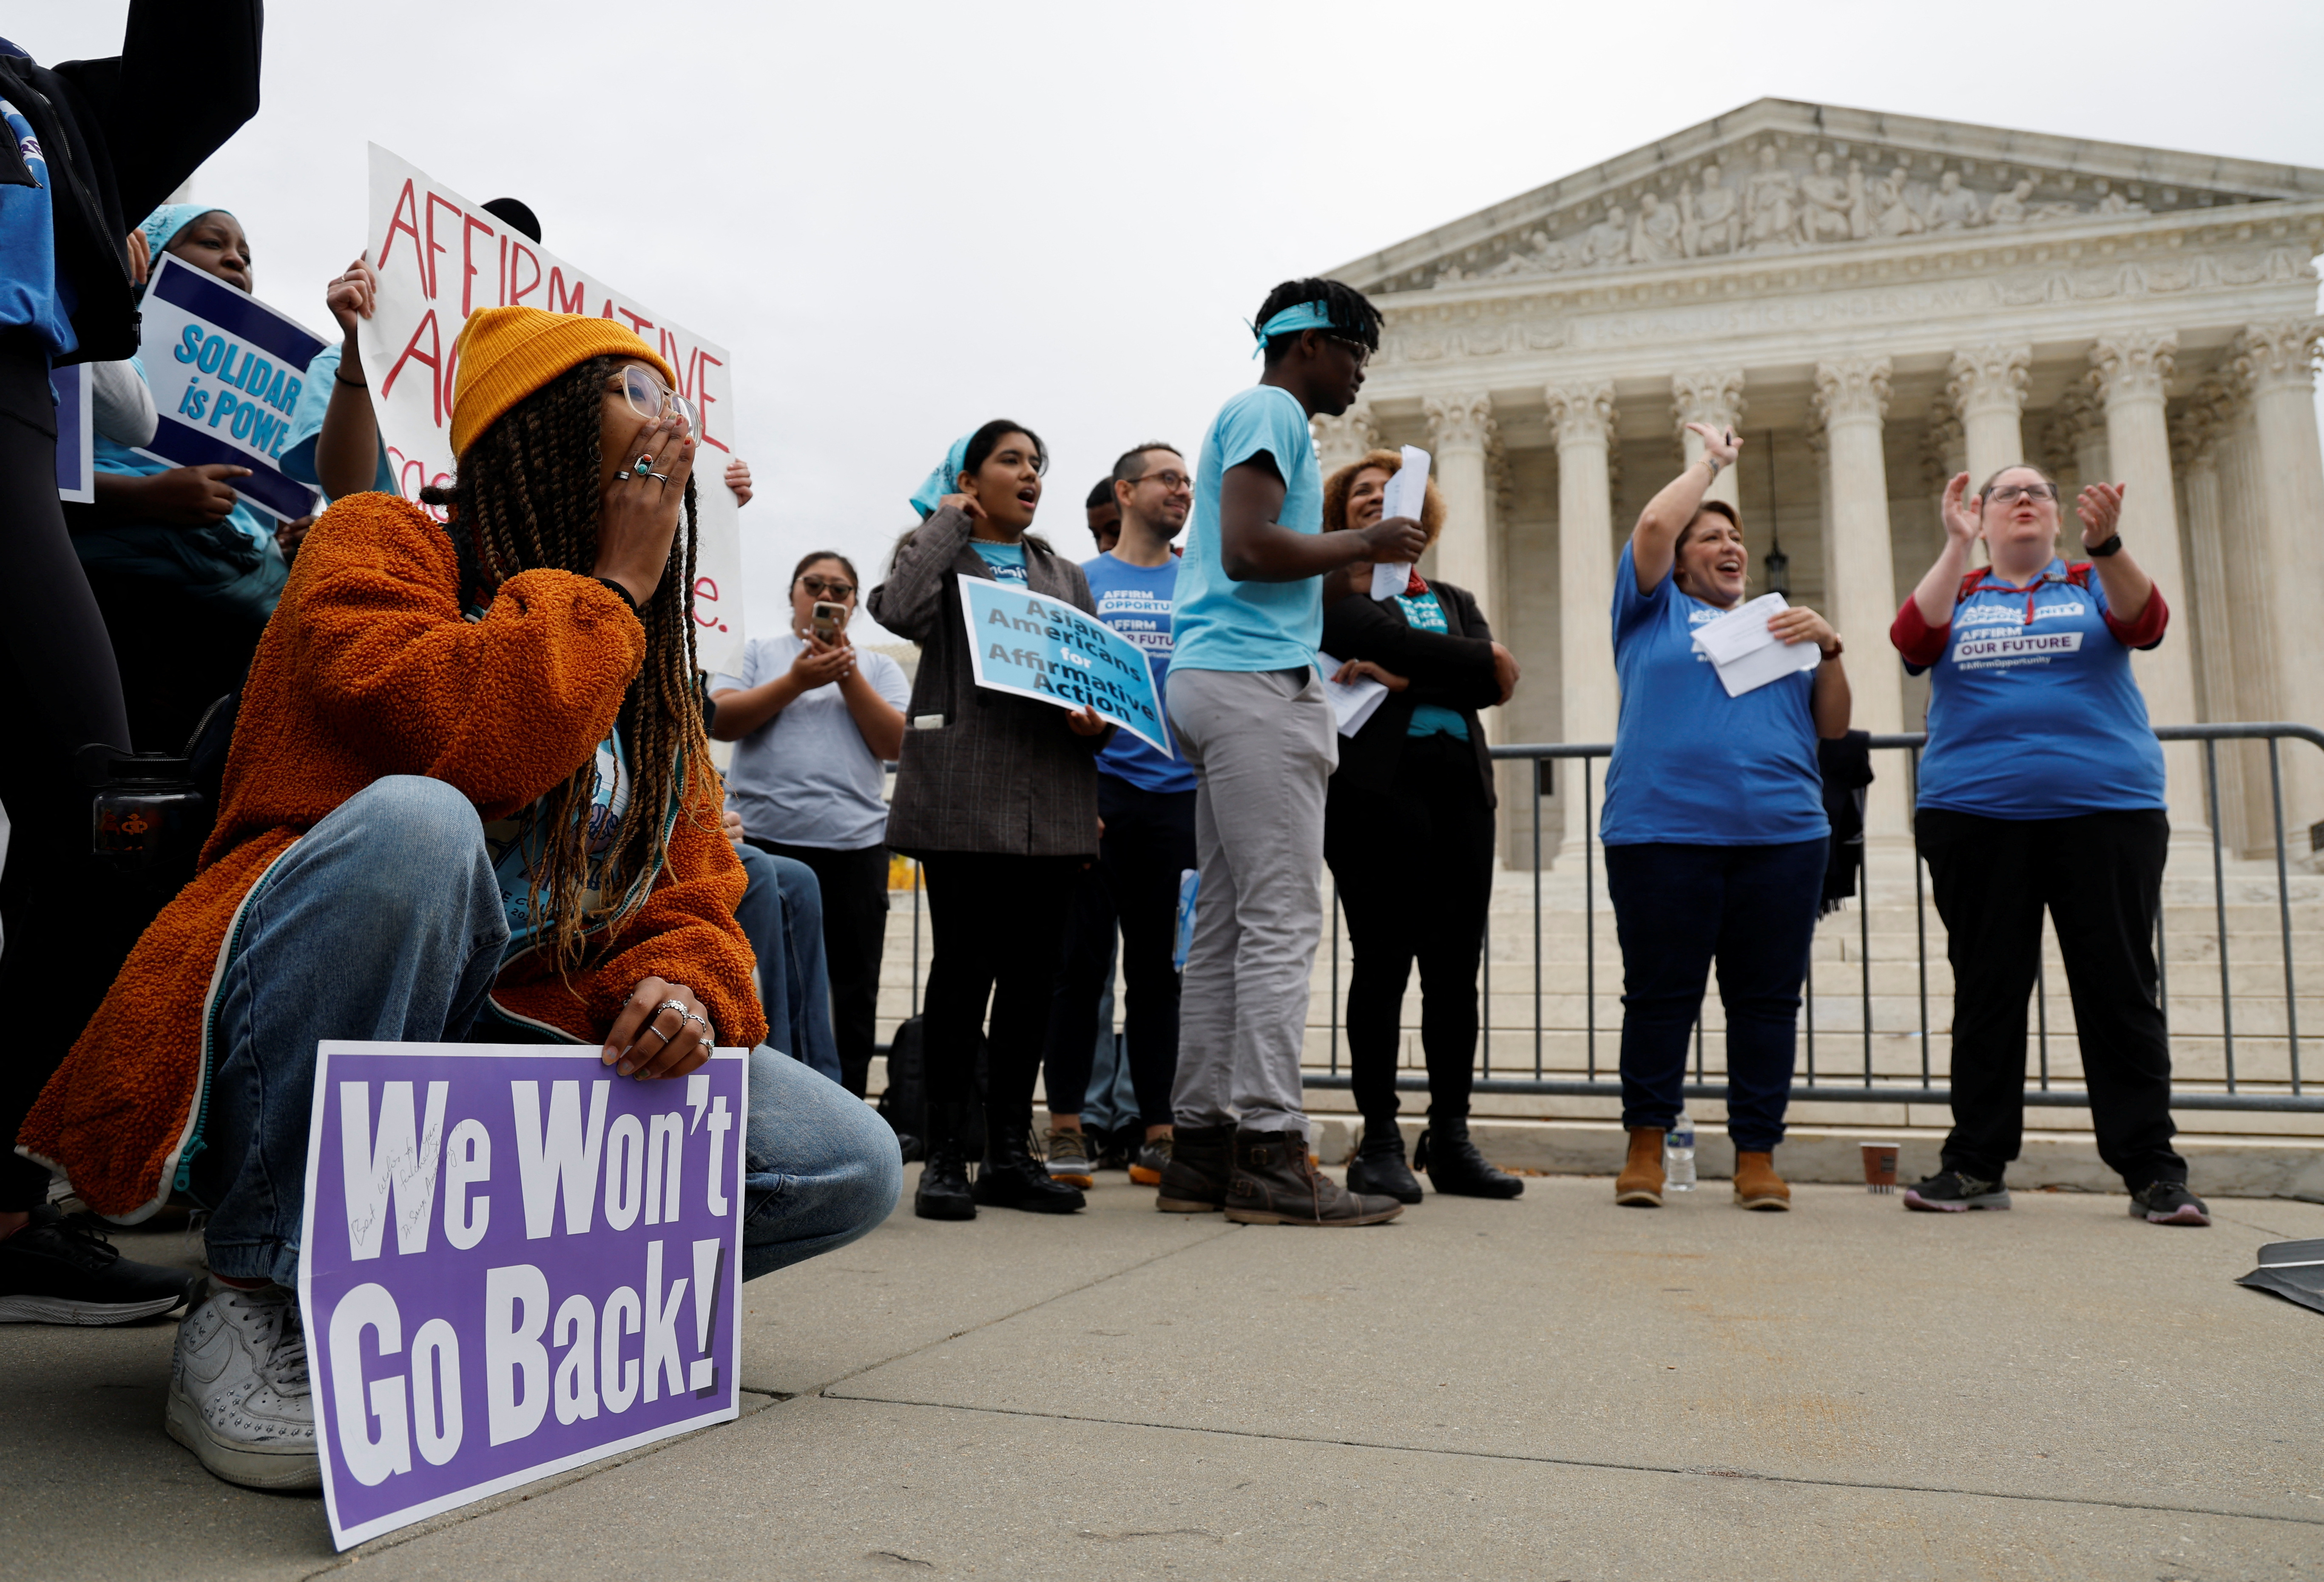 Gathering in support of affirmative action as U.S. Supreme Court hears challenge to race-conscious college admissions